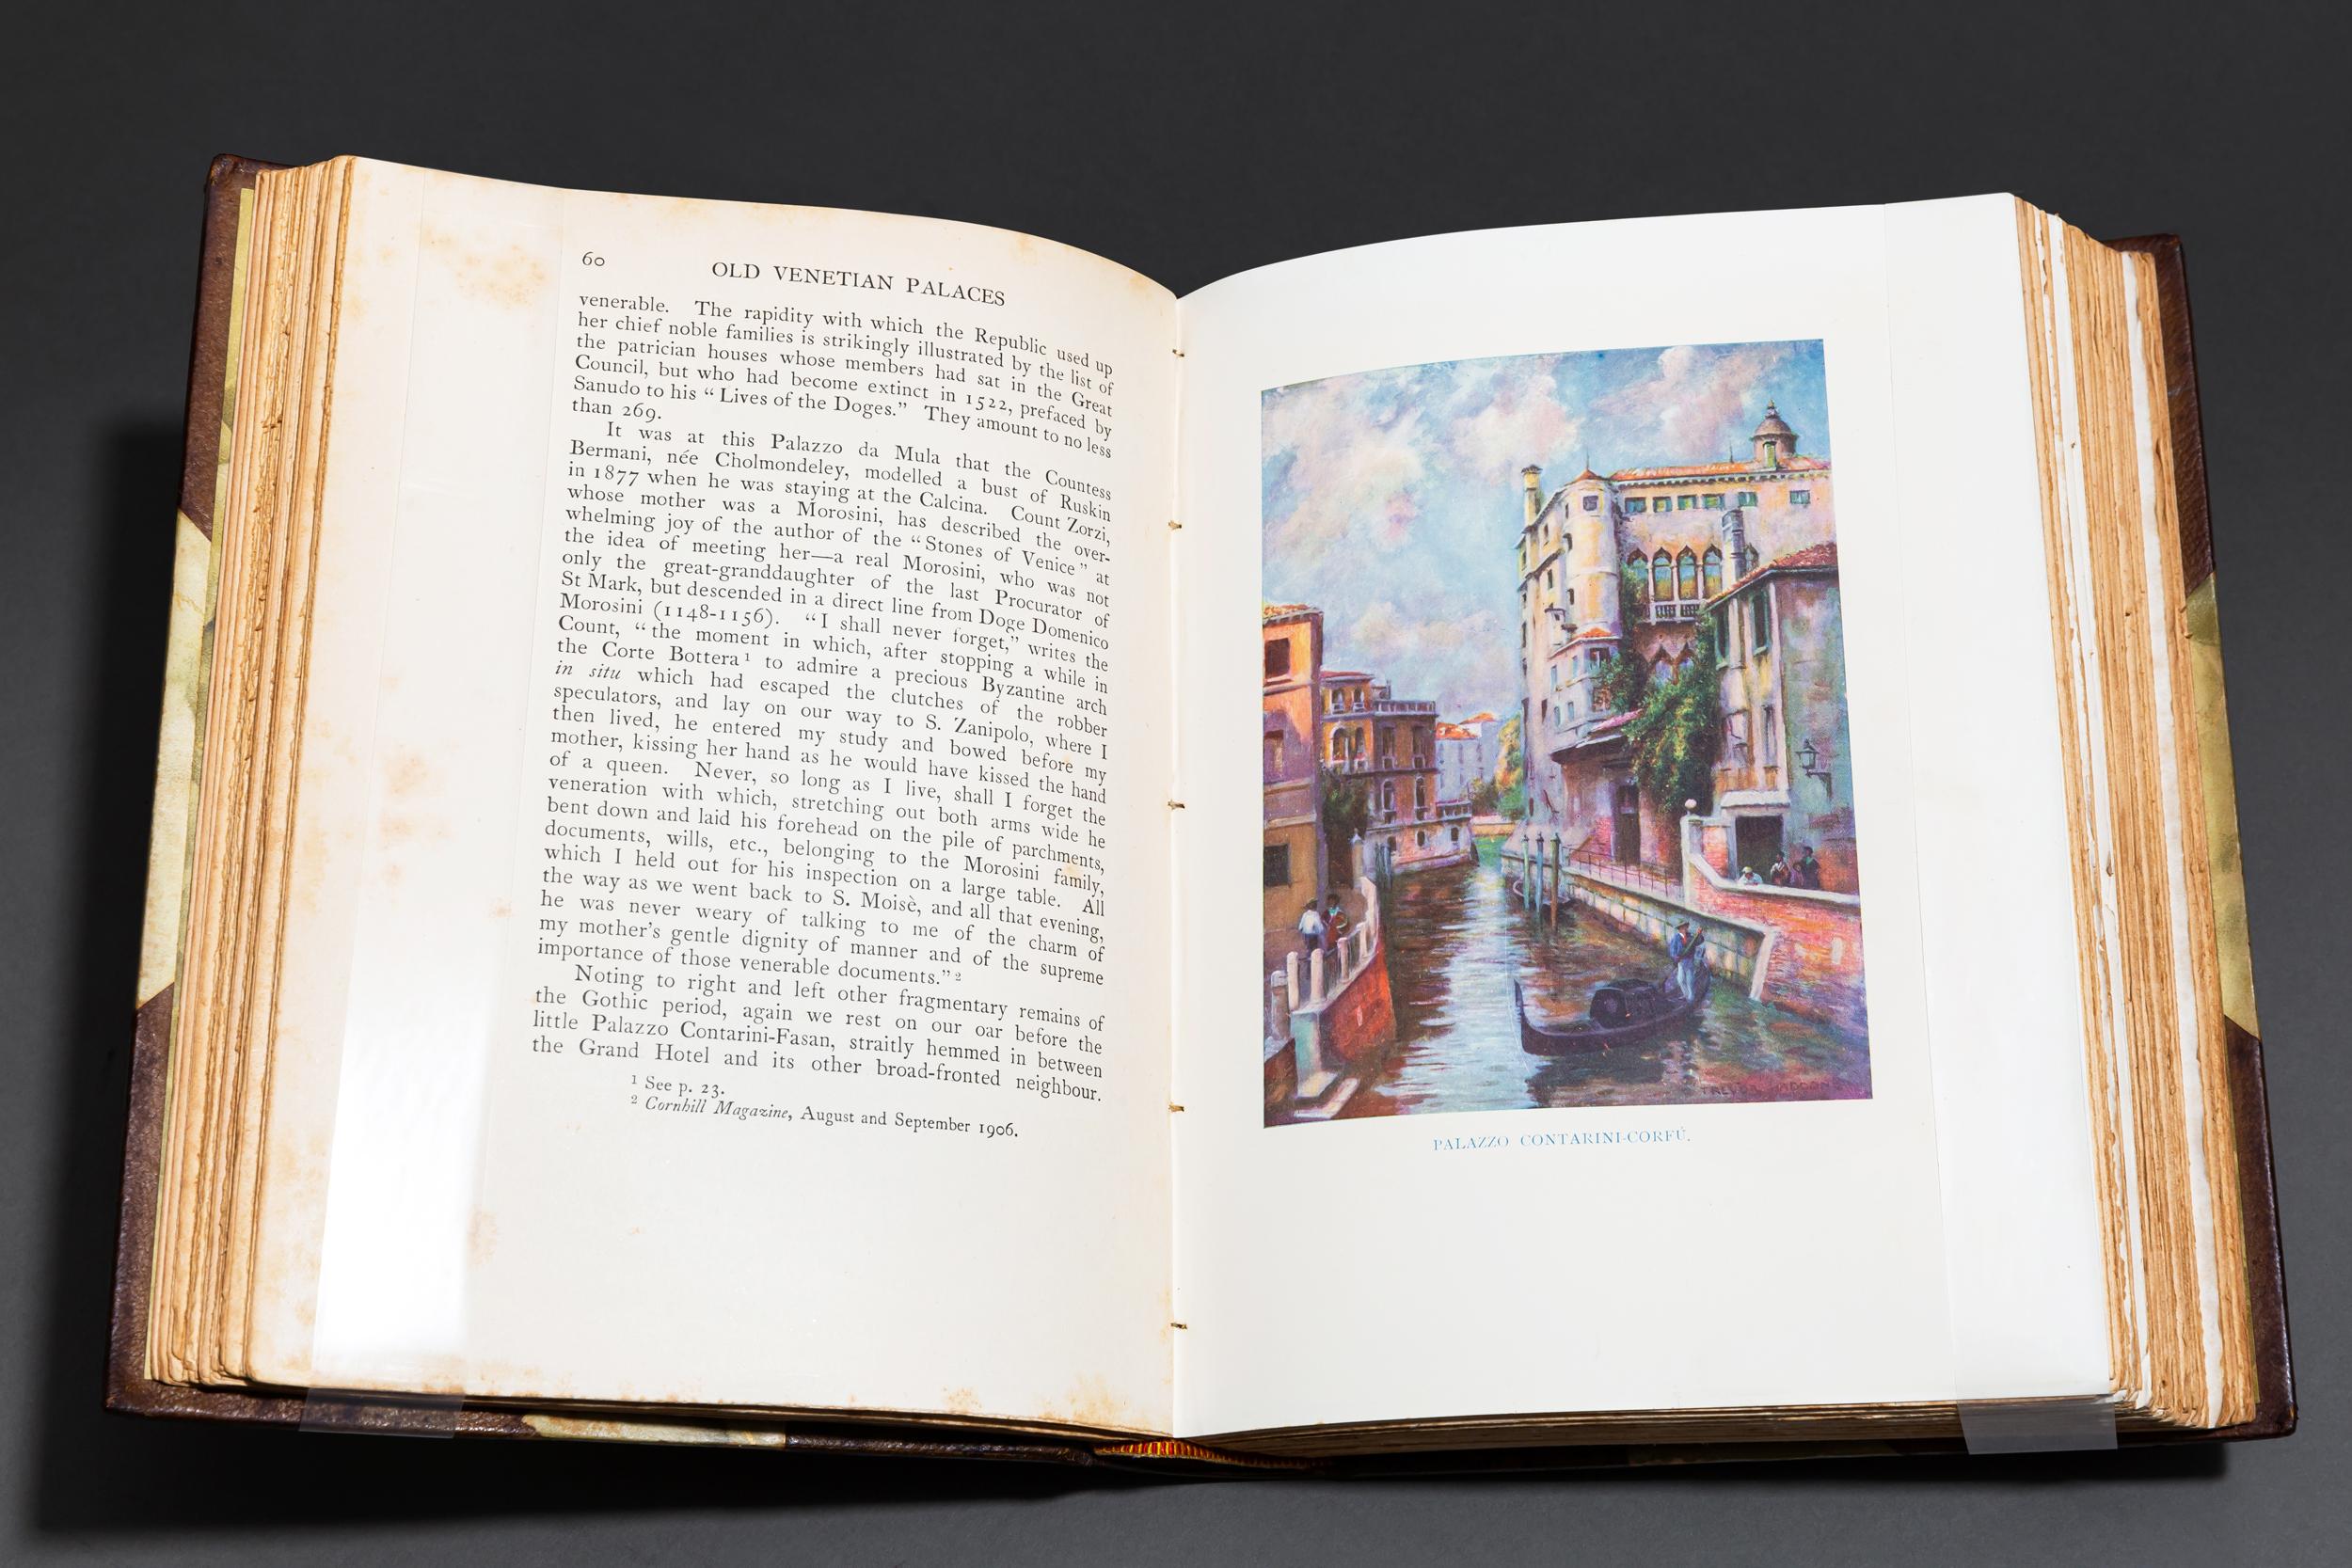 1 Volume. Thomas Okey. The Old Venetian Palaces and Old Venetian Folk. With Fifty Colored & other Illustrations. Bound in 3/4 brown morocco, marbled boards and endpapers, top edges gilt, raised bands, gilt panels.(some foxing throughout text).